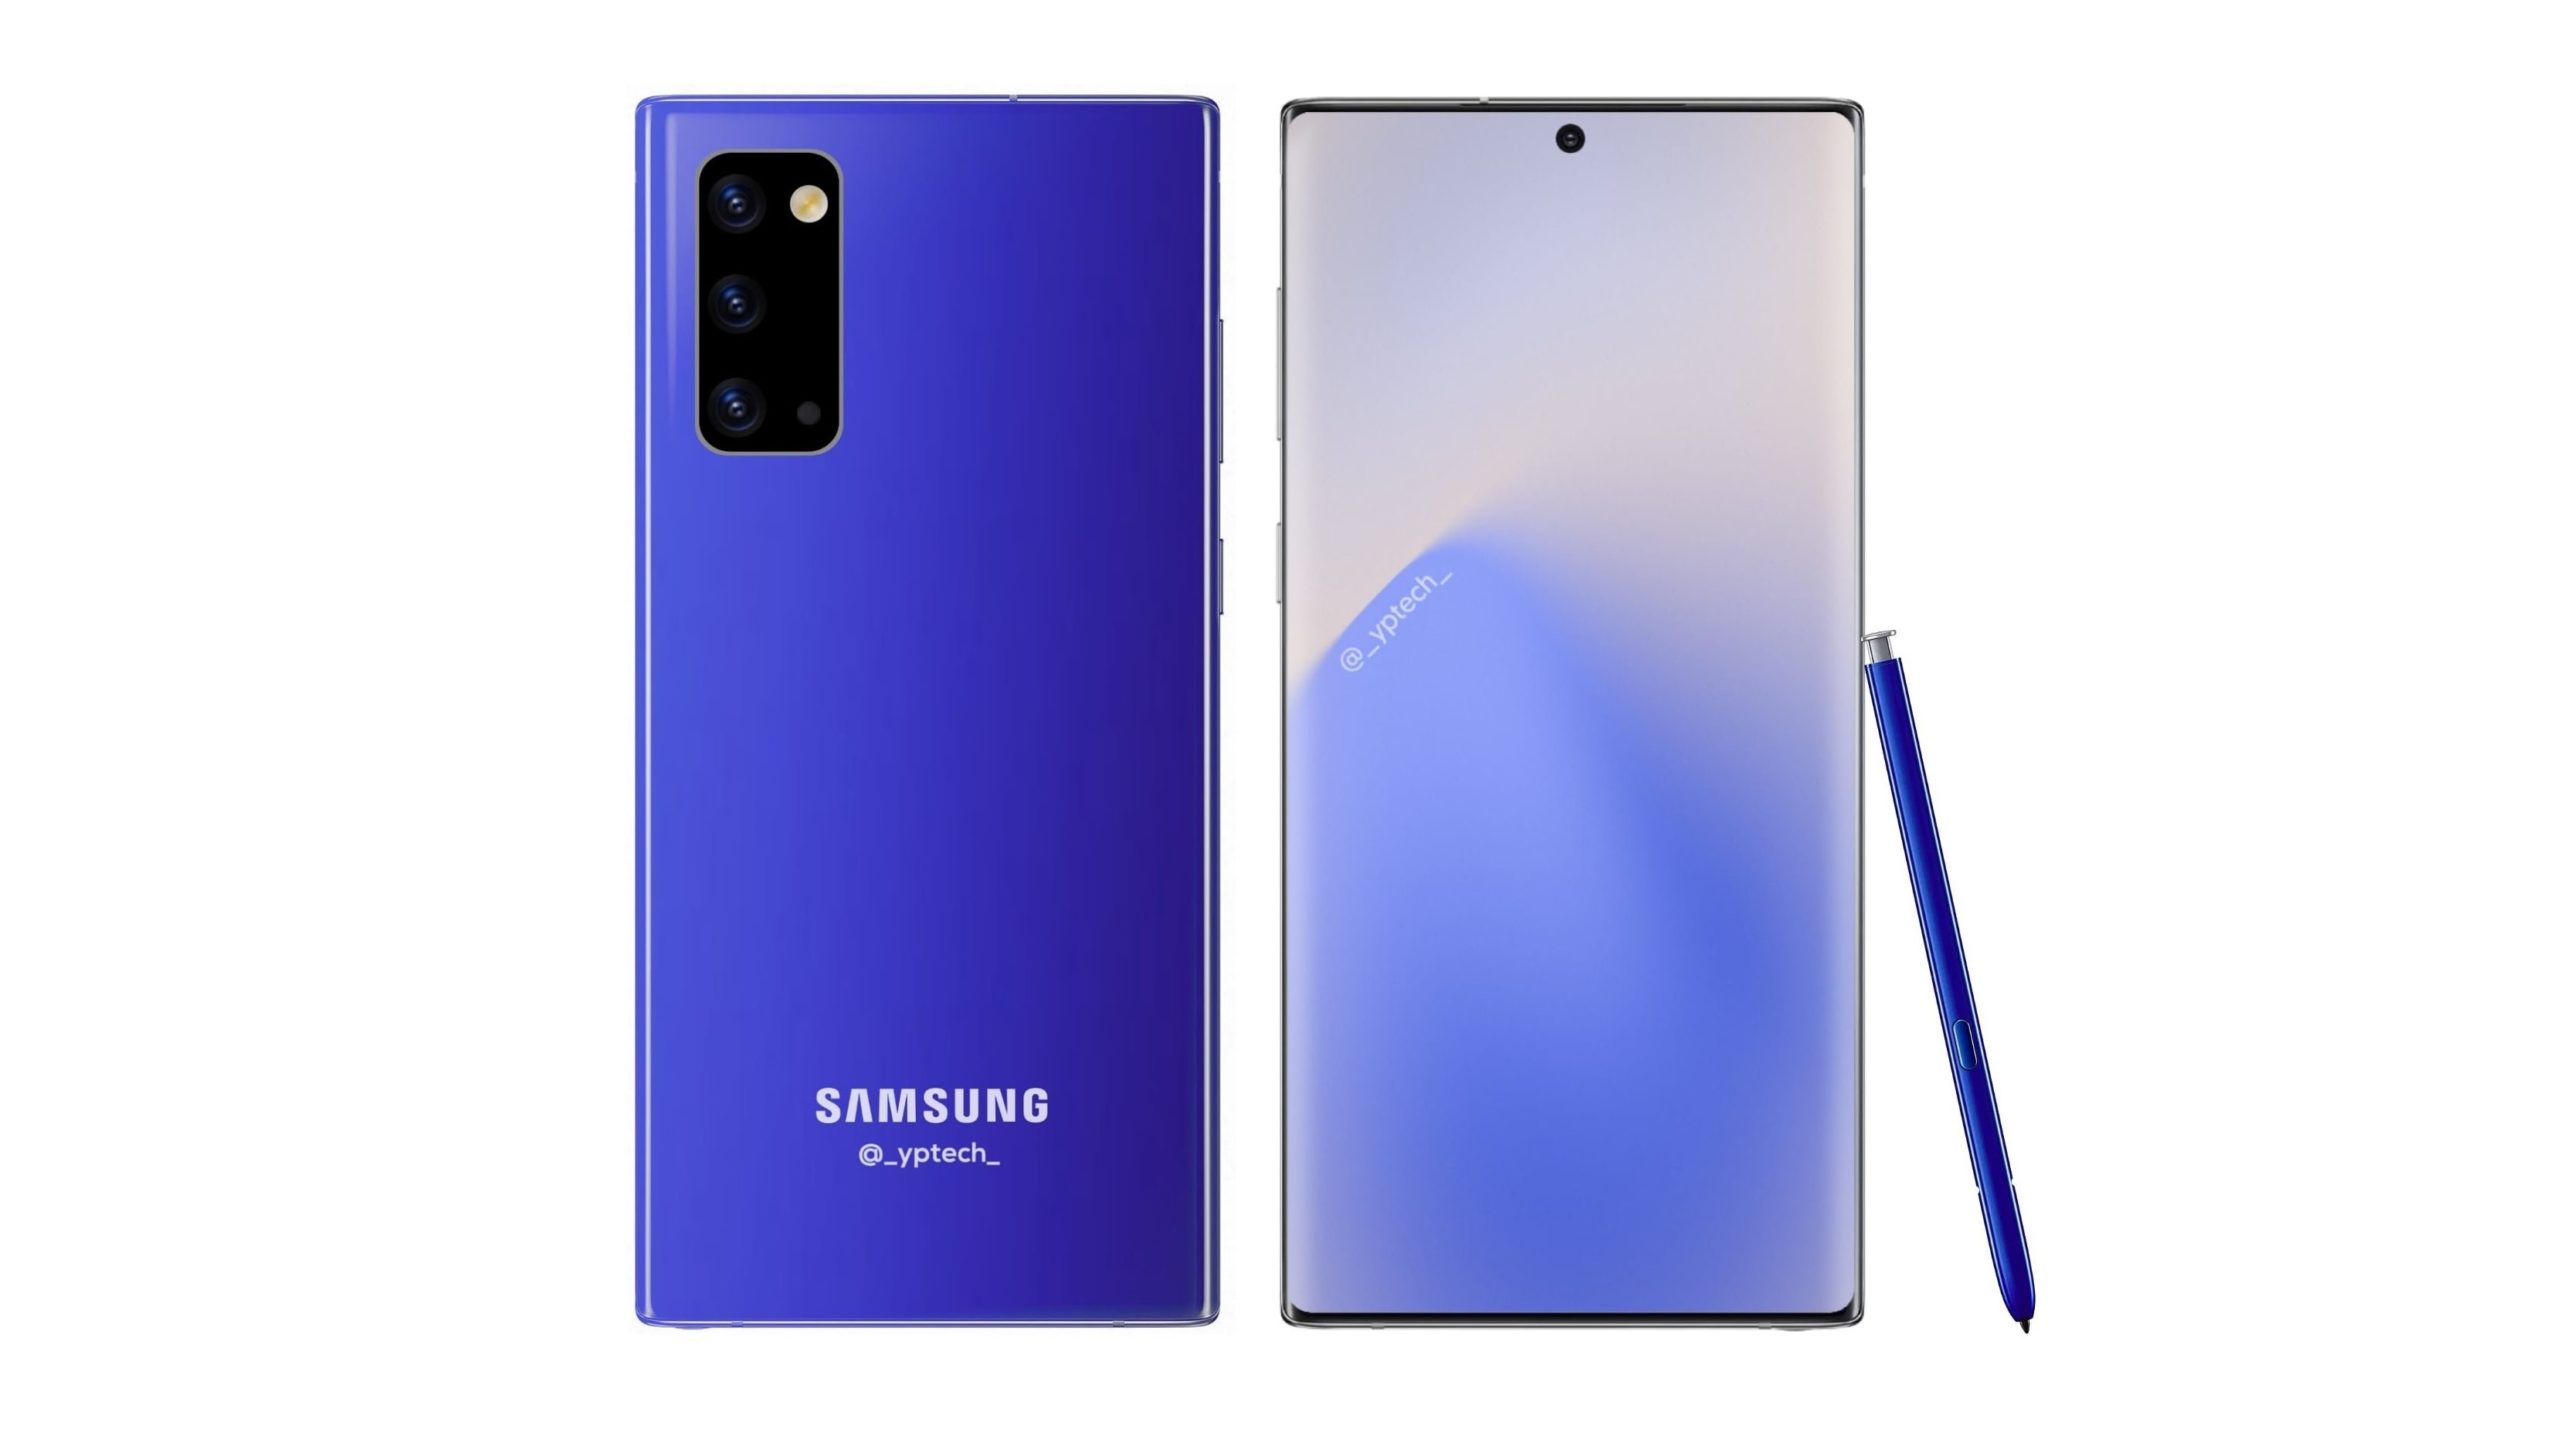 Samsung Galaxy Note 20 Review in Hindi Price in India Specification Features RAM Storage Camera Full-Screen Display Launch Date सभी जानकारी हिंदी में पढ़े